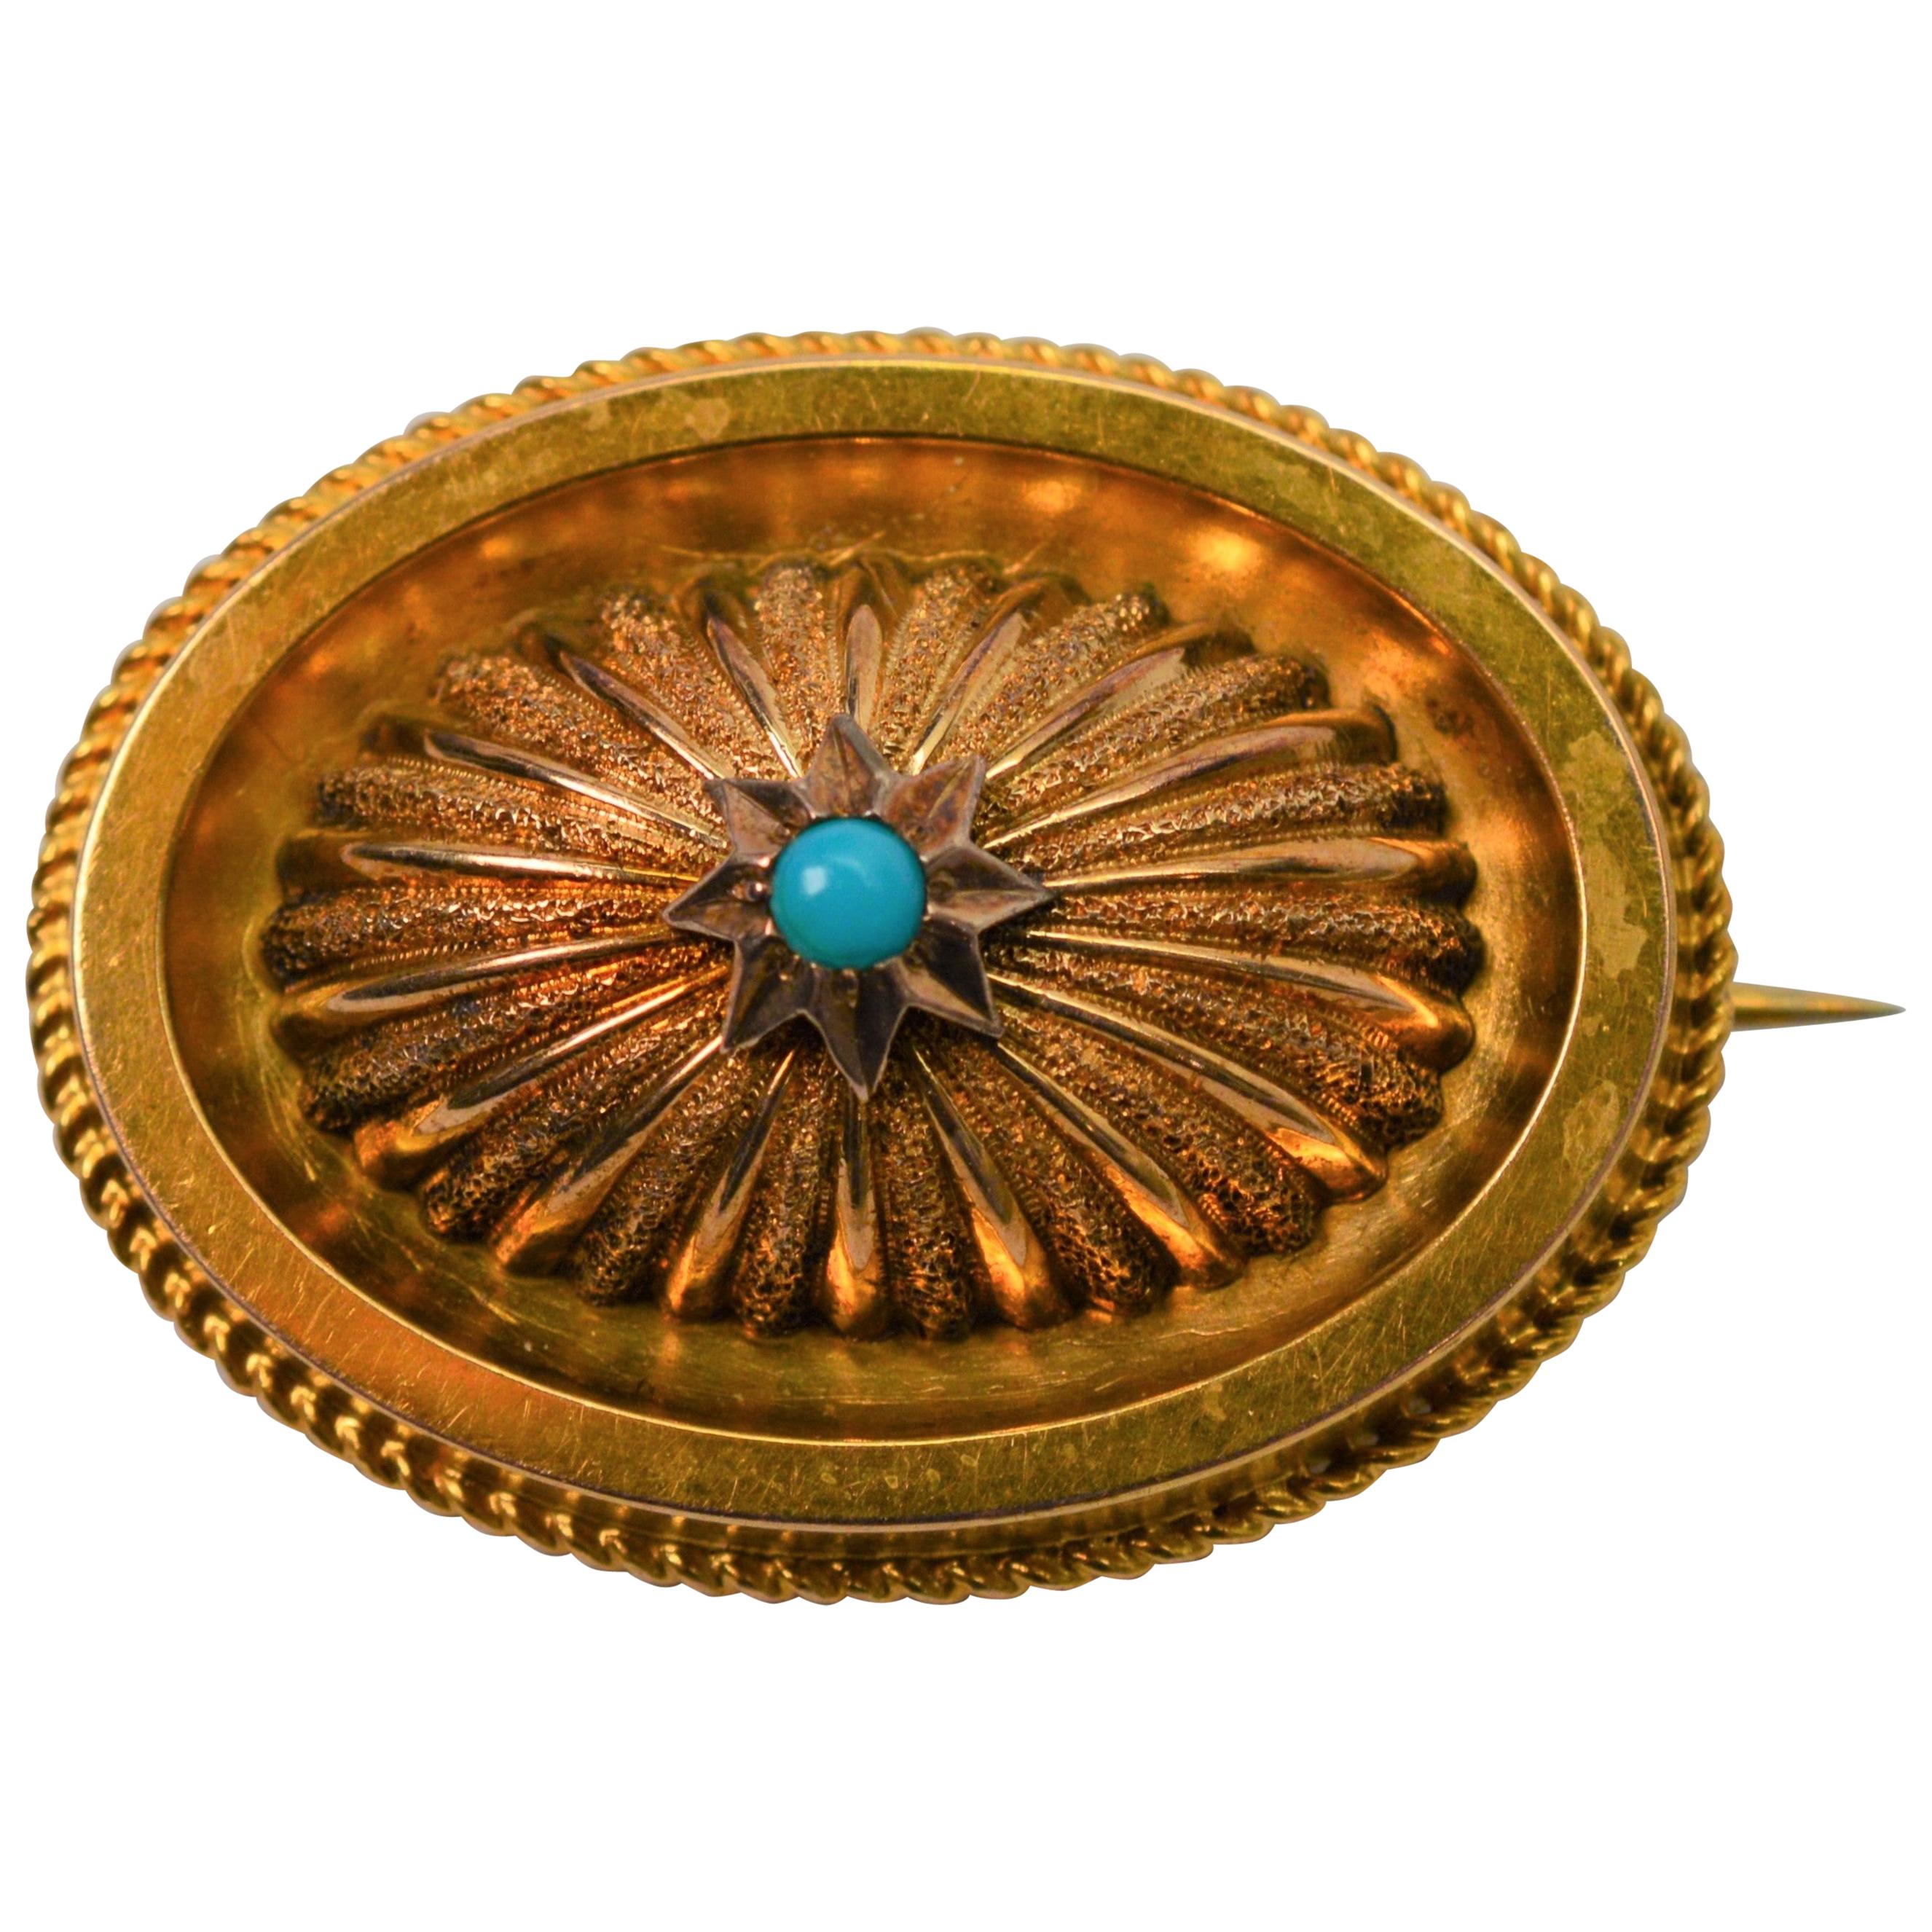 Antique Gold Medallion Brooch with Turquoise Accent